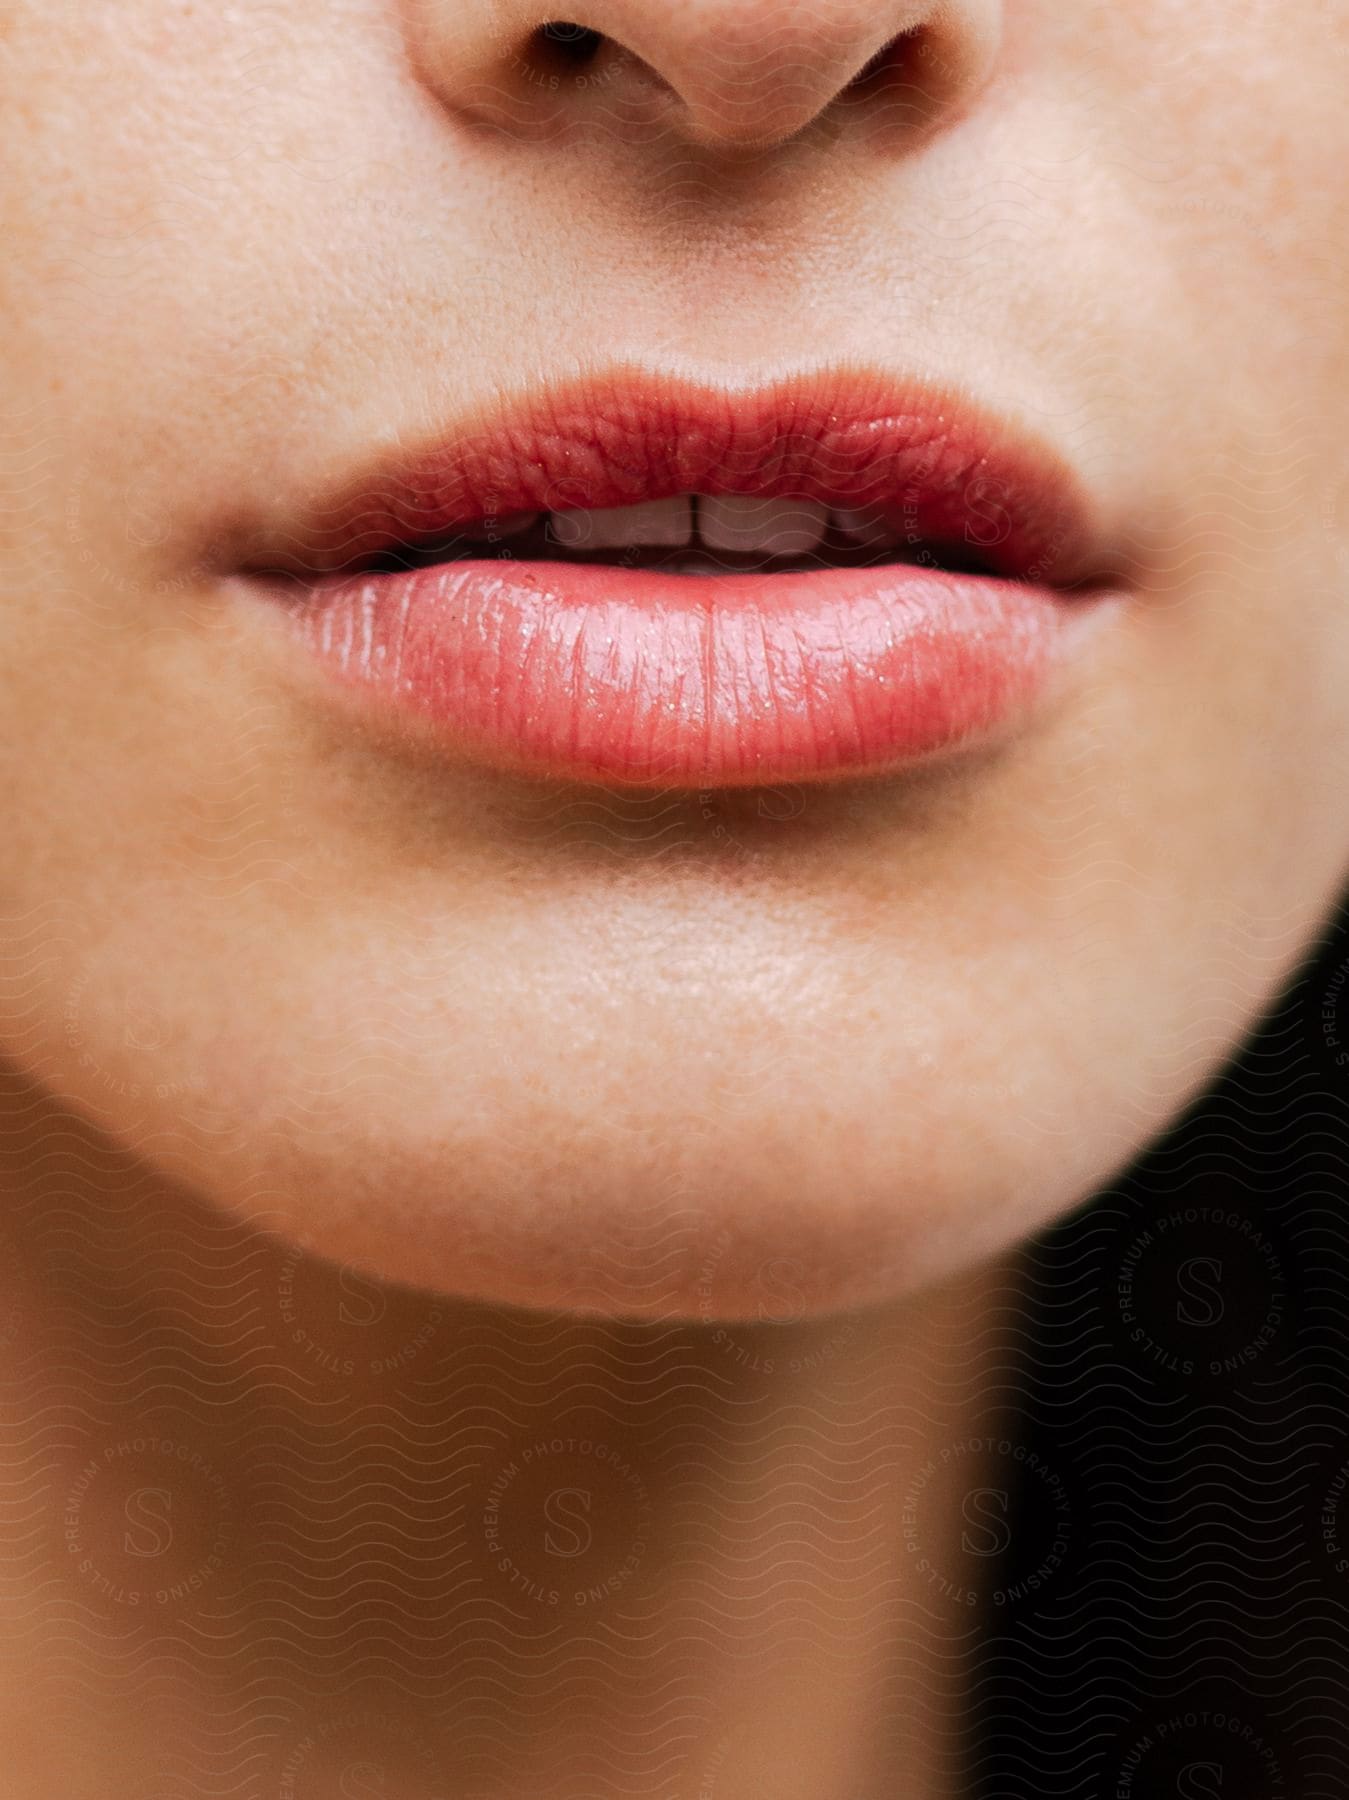 Close-up of a woman's mouth with light red lipstick